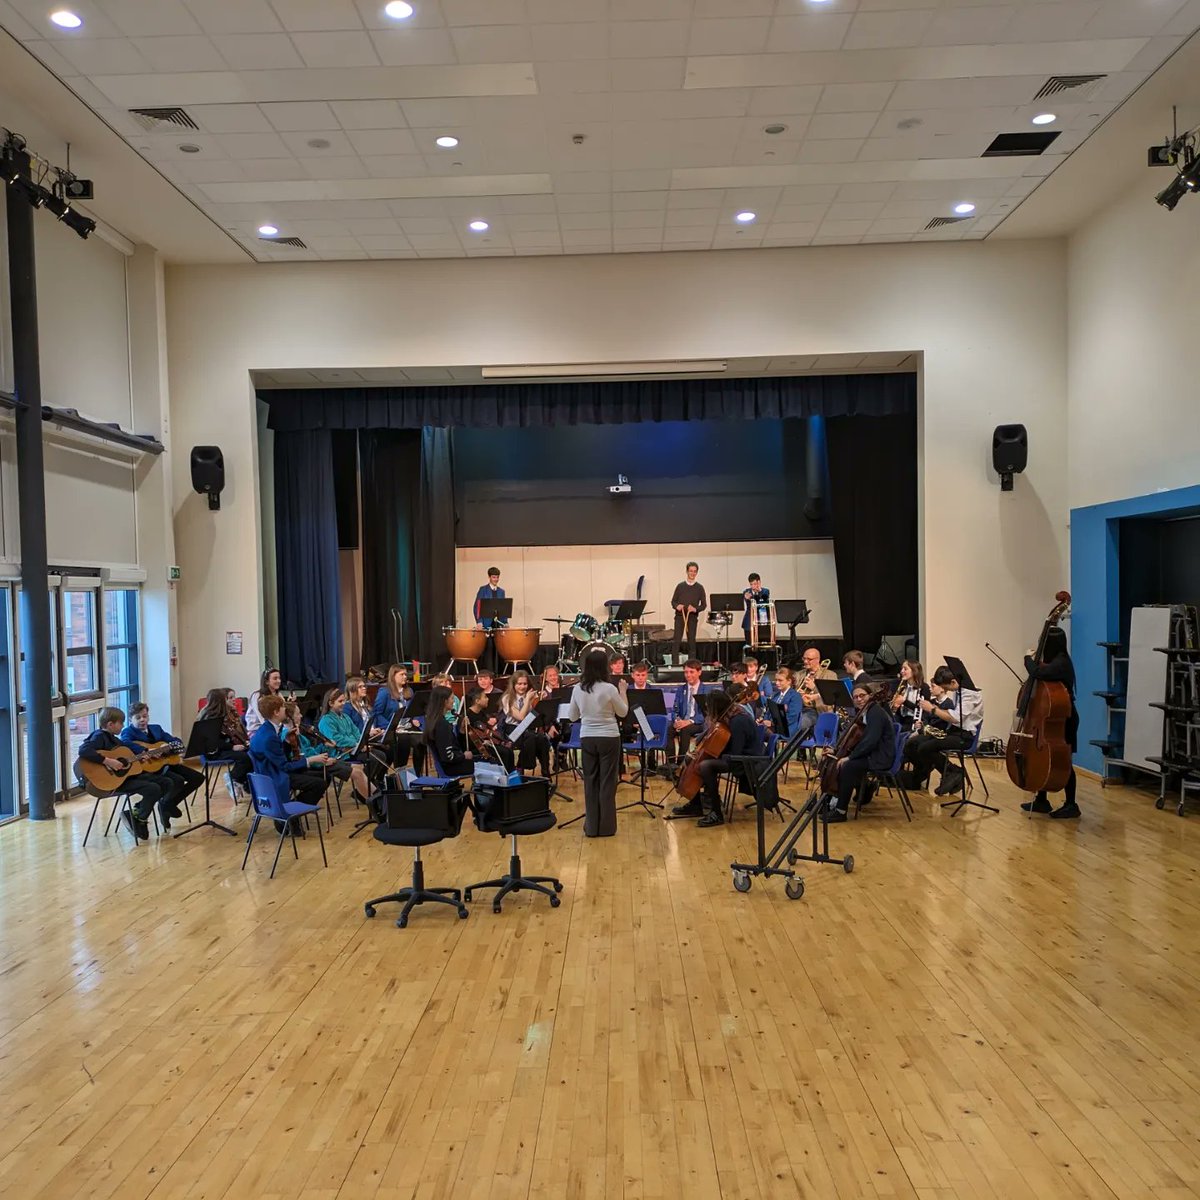 We are really enjoying working with P7s from all our cluster primary schools in Orchestra and Choir and can't wait to show you what we have been working on in our school concert on Monday 25th March. @stmaryseps @DunblanePrimary @NewtonPrimary01 @DunblaneHS